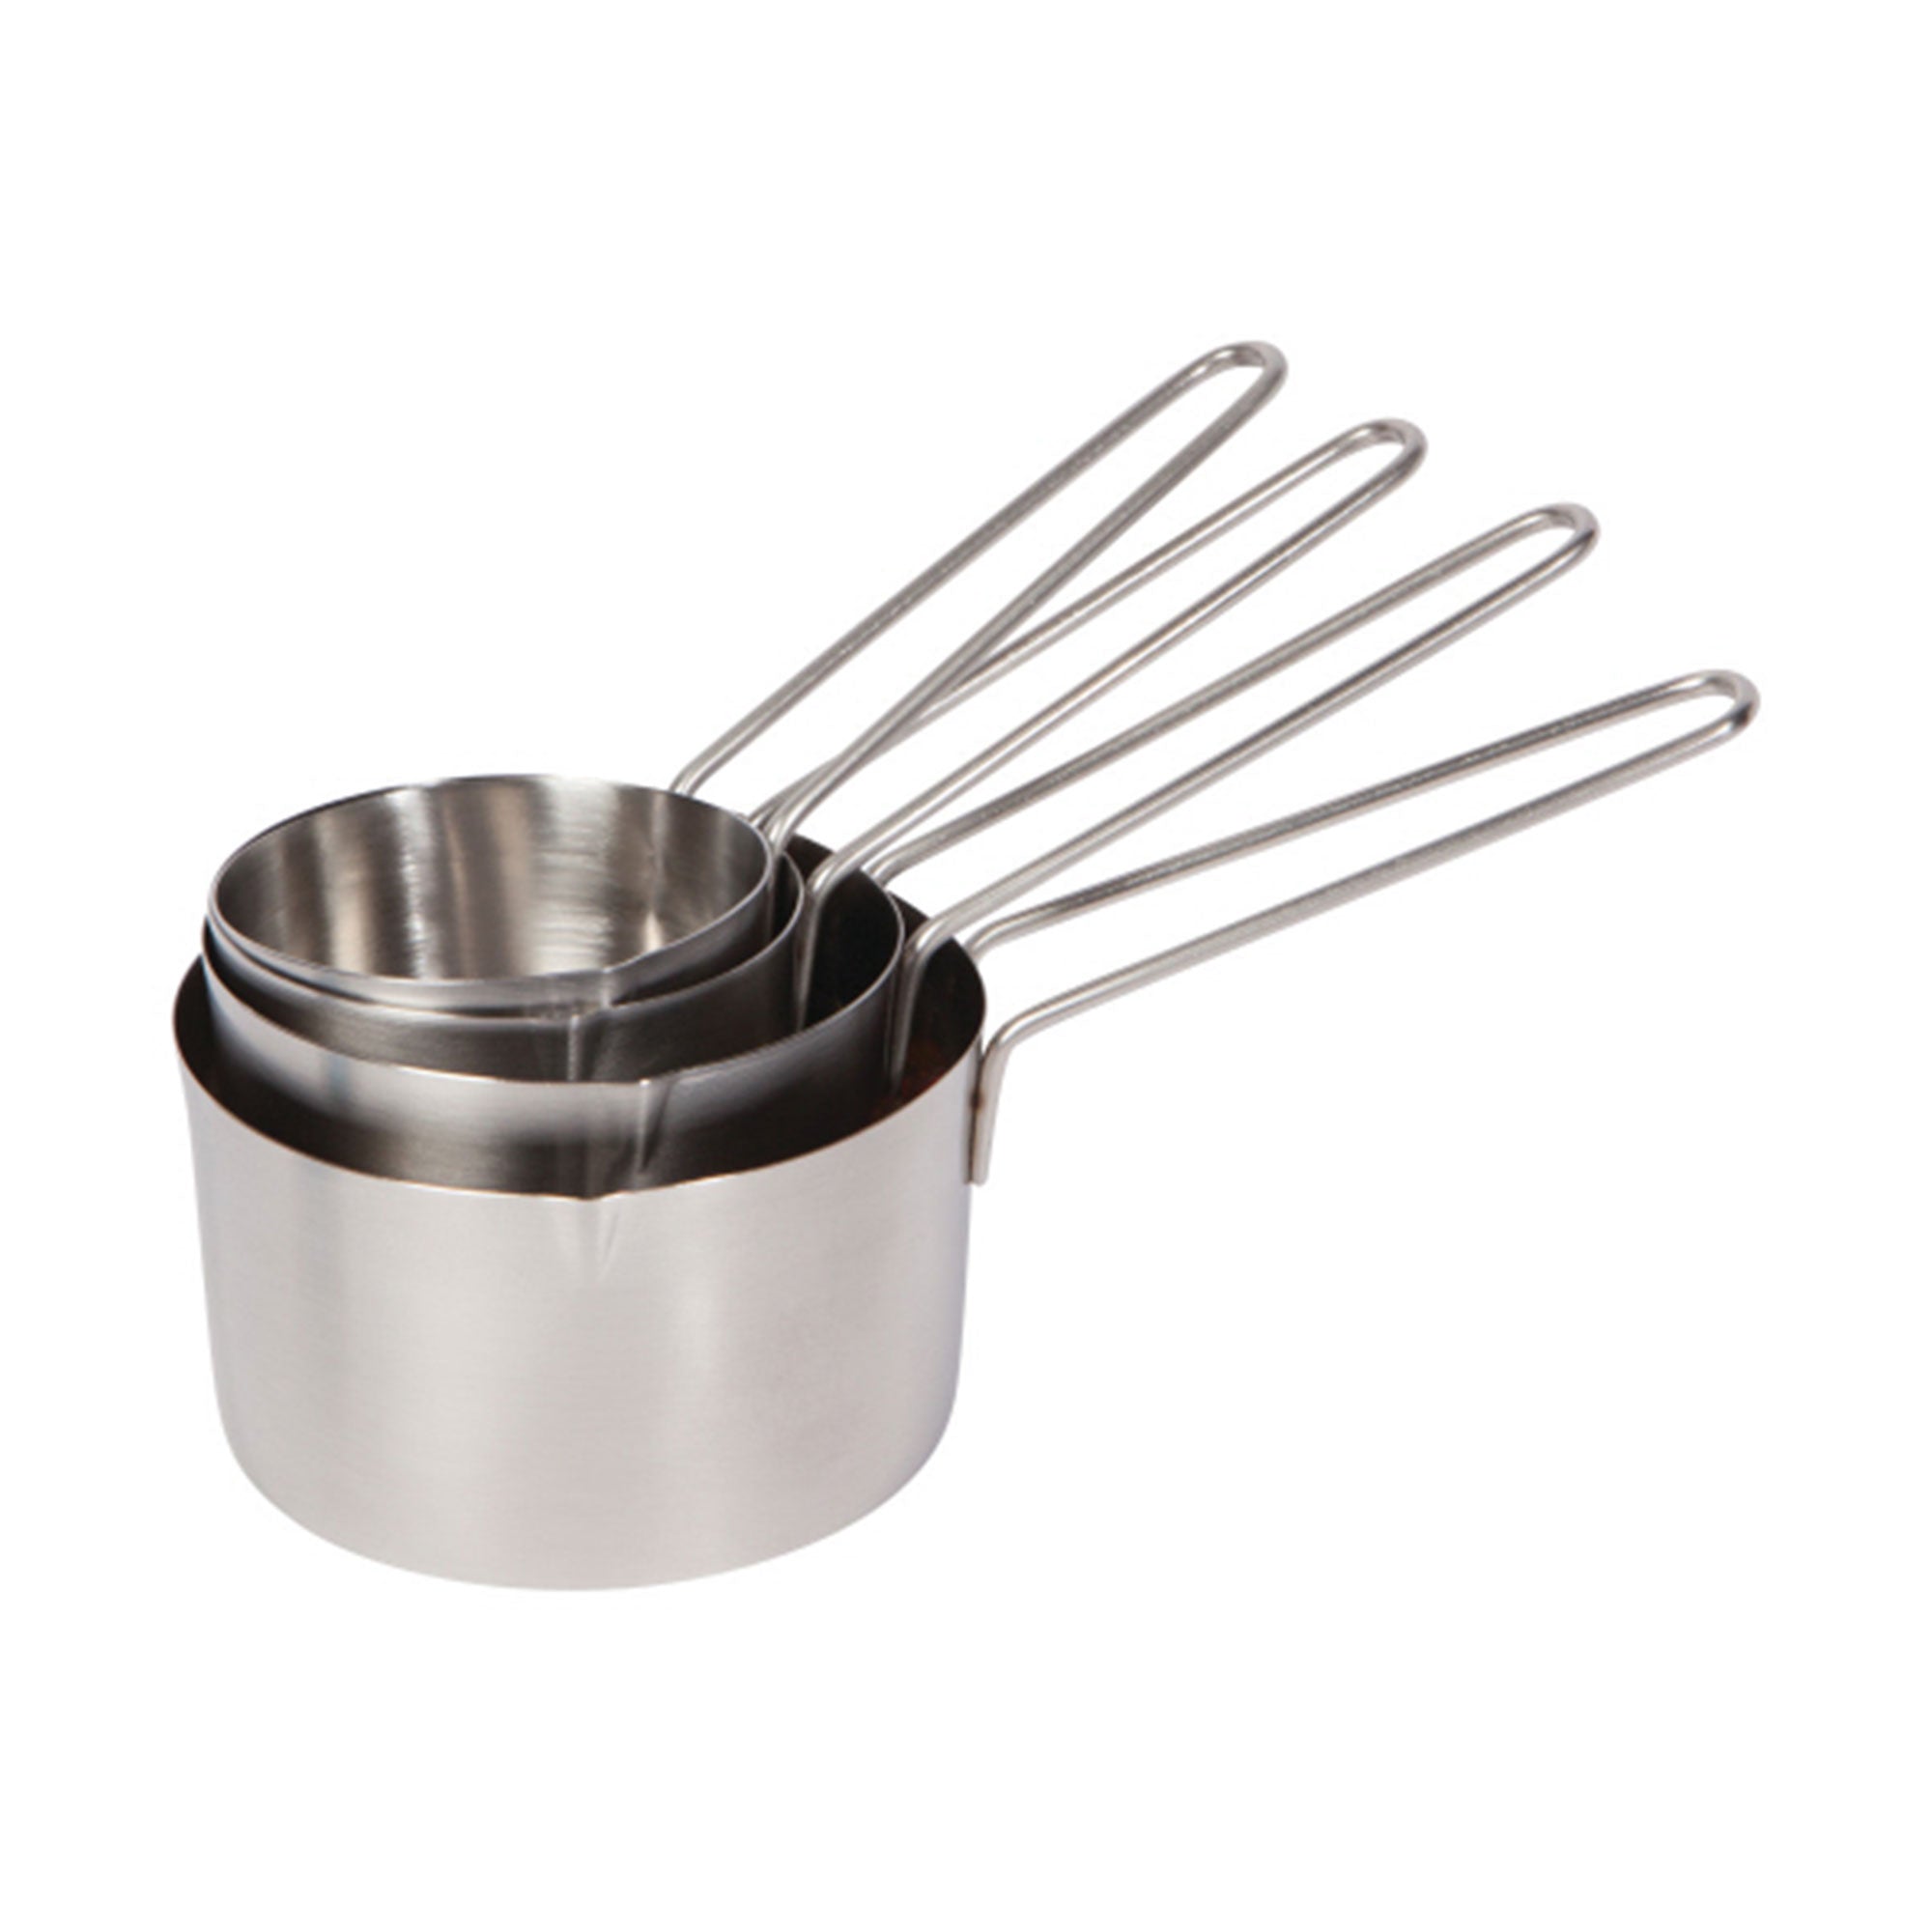 Stainless Steel Measuring Cups (Set of 4)